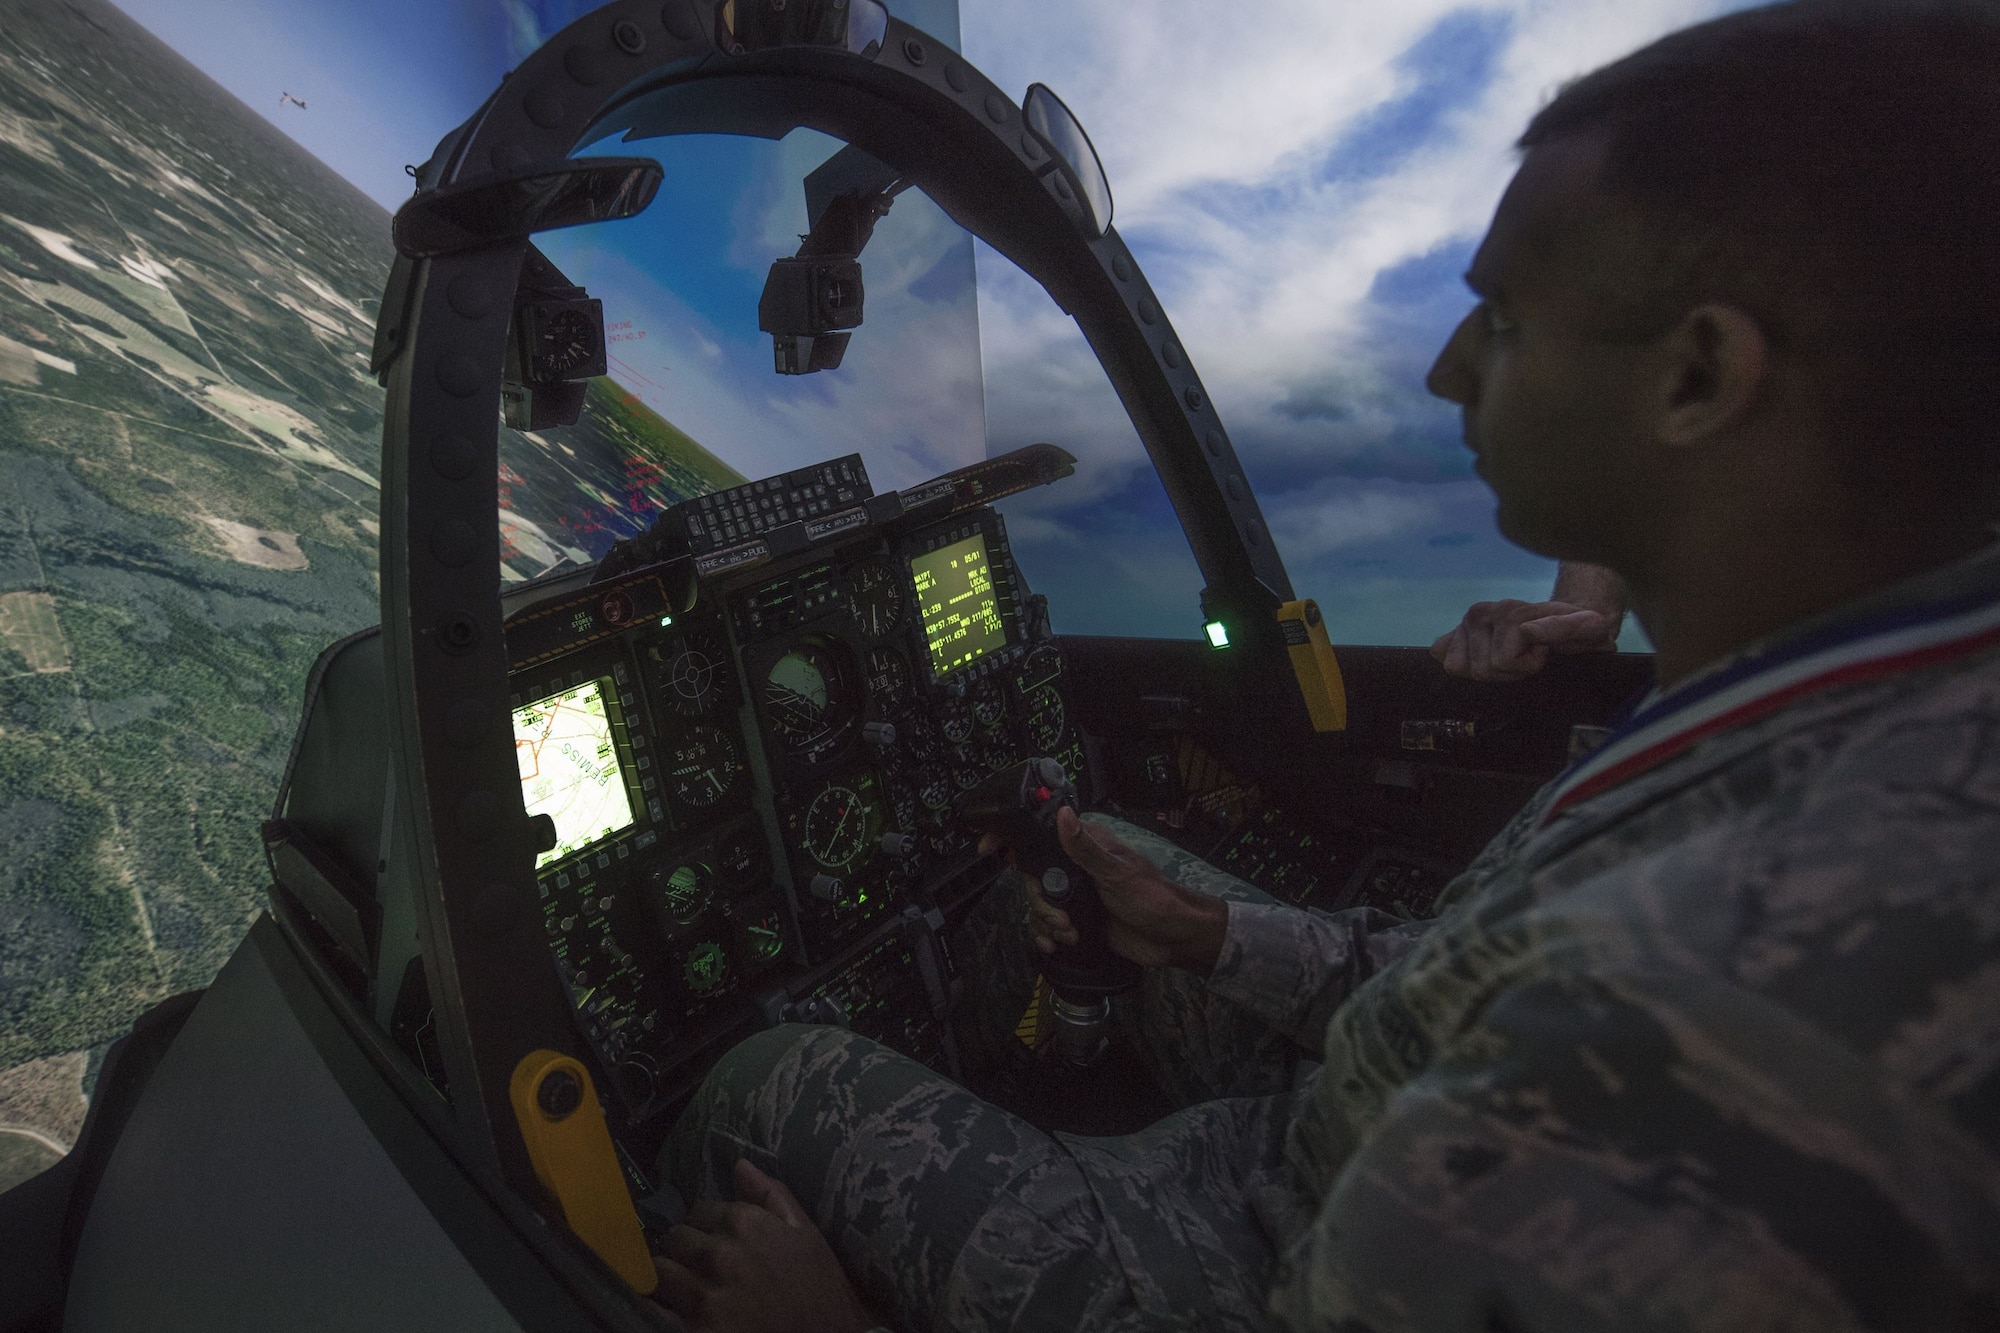 Senior Airman Andrew Soarez, 23d Medical Support Squadron medical laboratory technician, flies in an A-10C Thunderbolt II simulator during a Tour of Champions, Feb. 2, 2018, at Moody Air Force Base, Ga. The Tour of Champions recognizes 23d Wing annual award nominees and an opportunity to gain a better perspective of the 23d Wing’s mission. (U.S. Air Force photo by Senior Airman Daniel Snider)